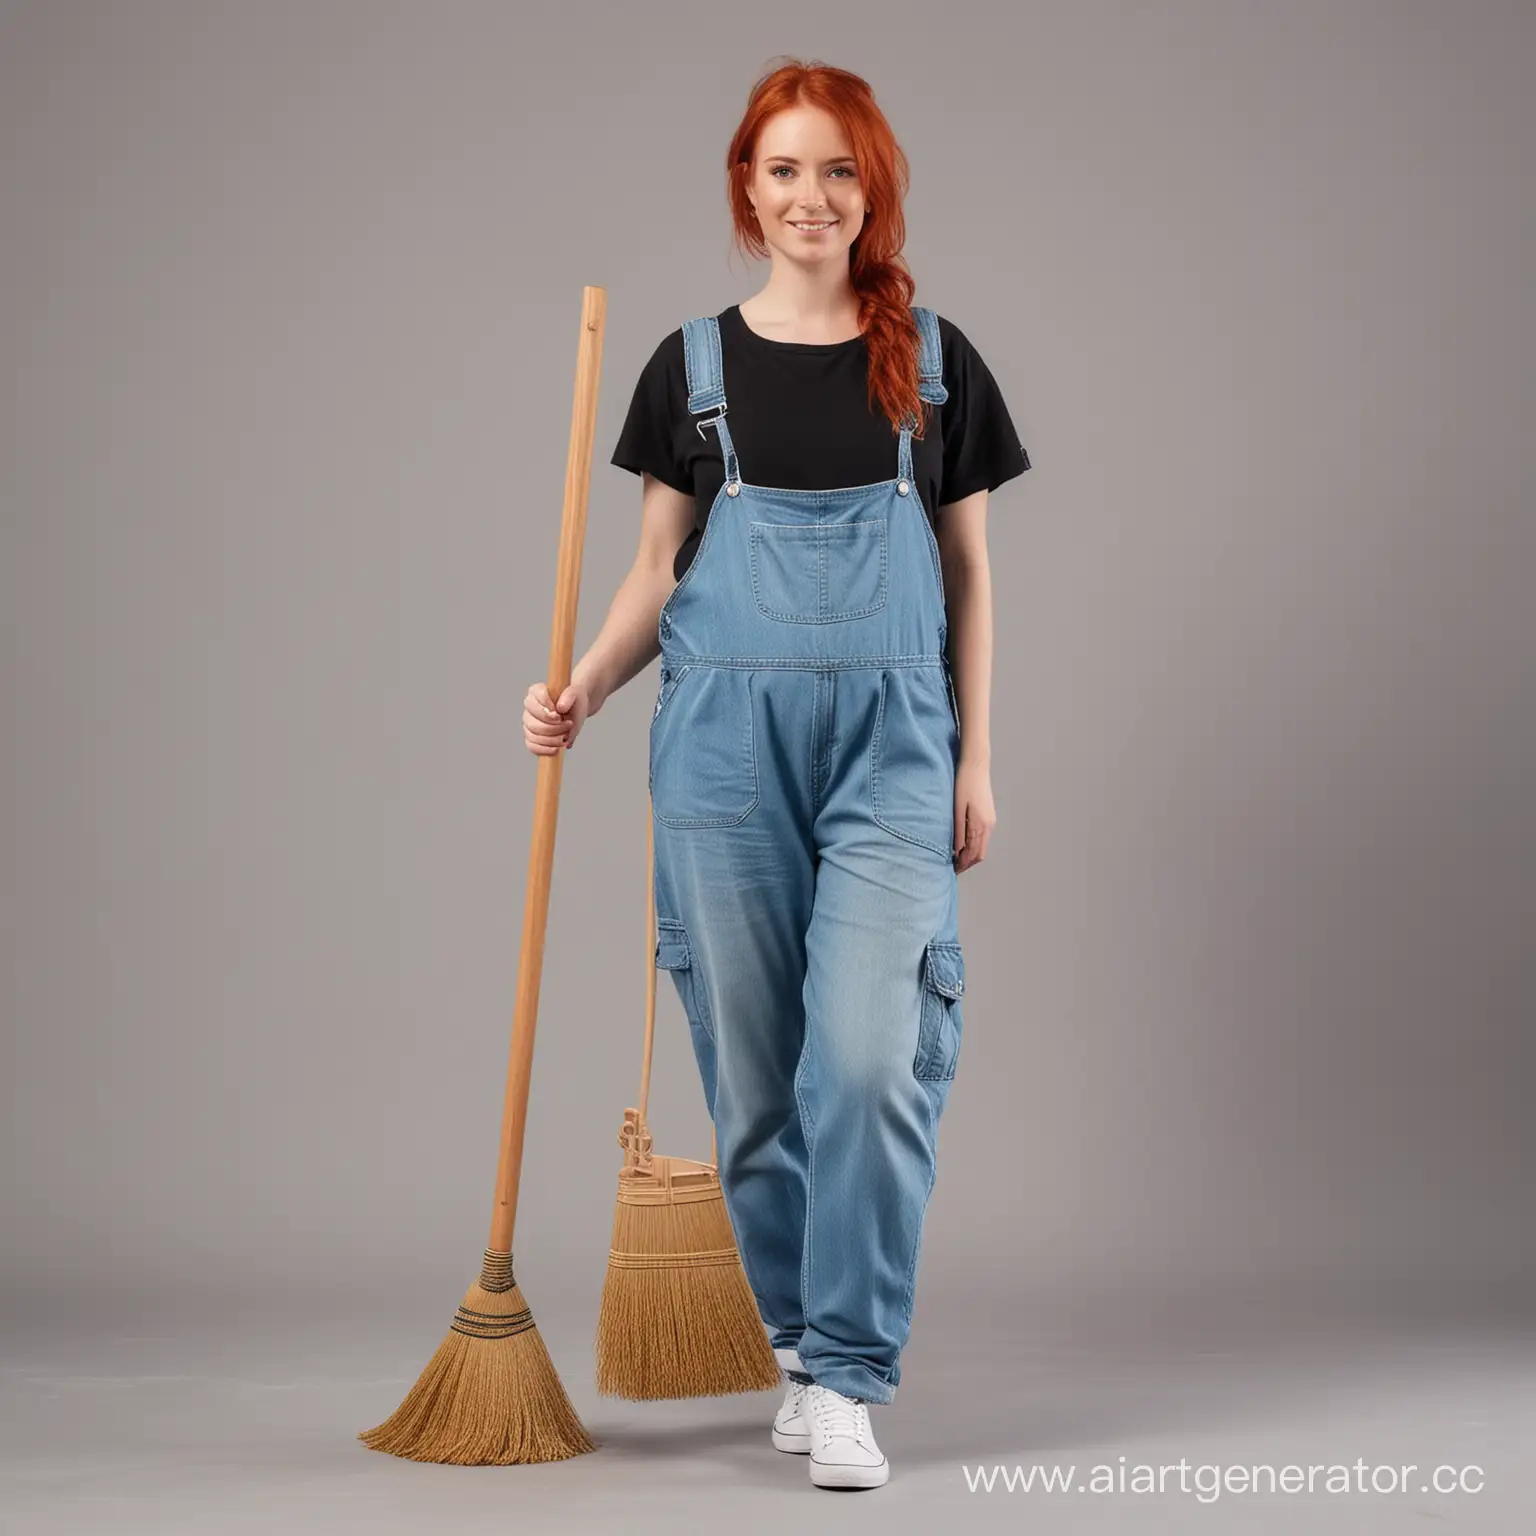 RedHaired-Pregnant-Woman-in-Janitors-Attire-with-Broom